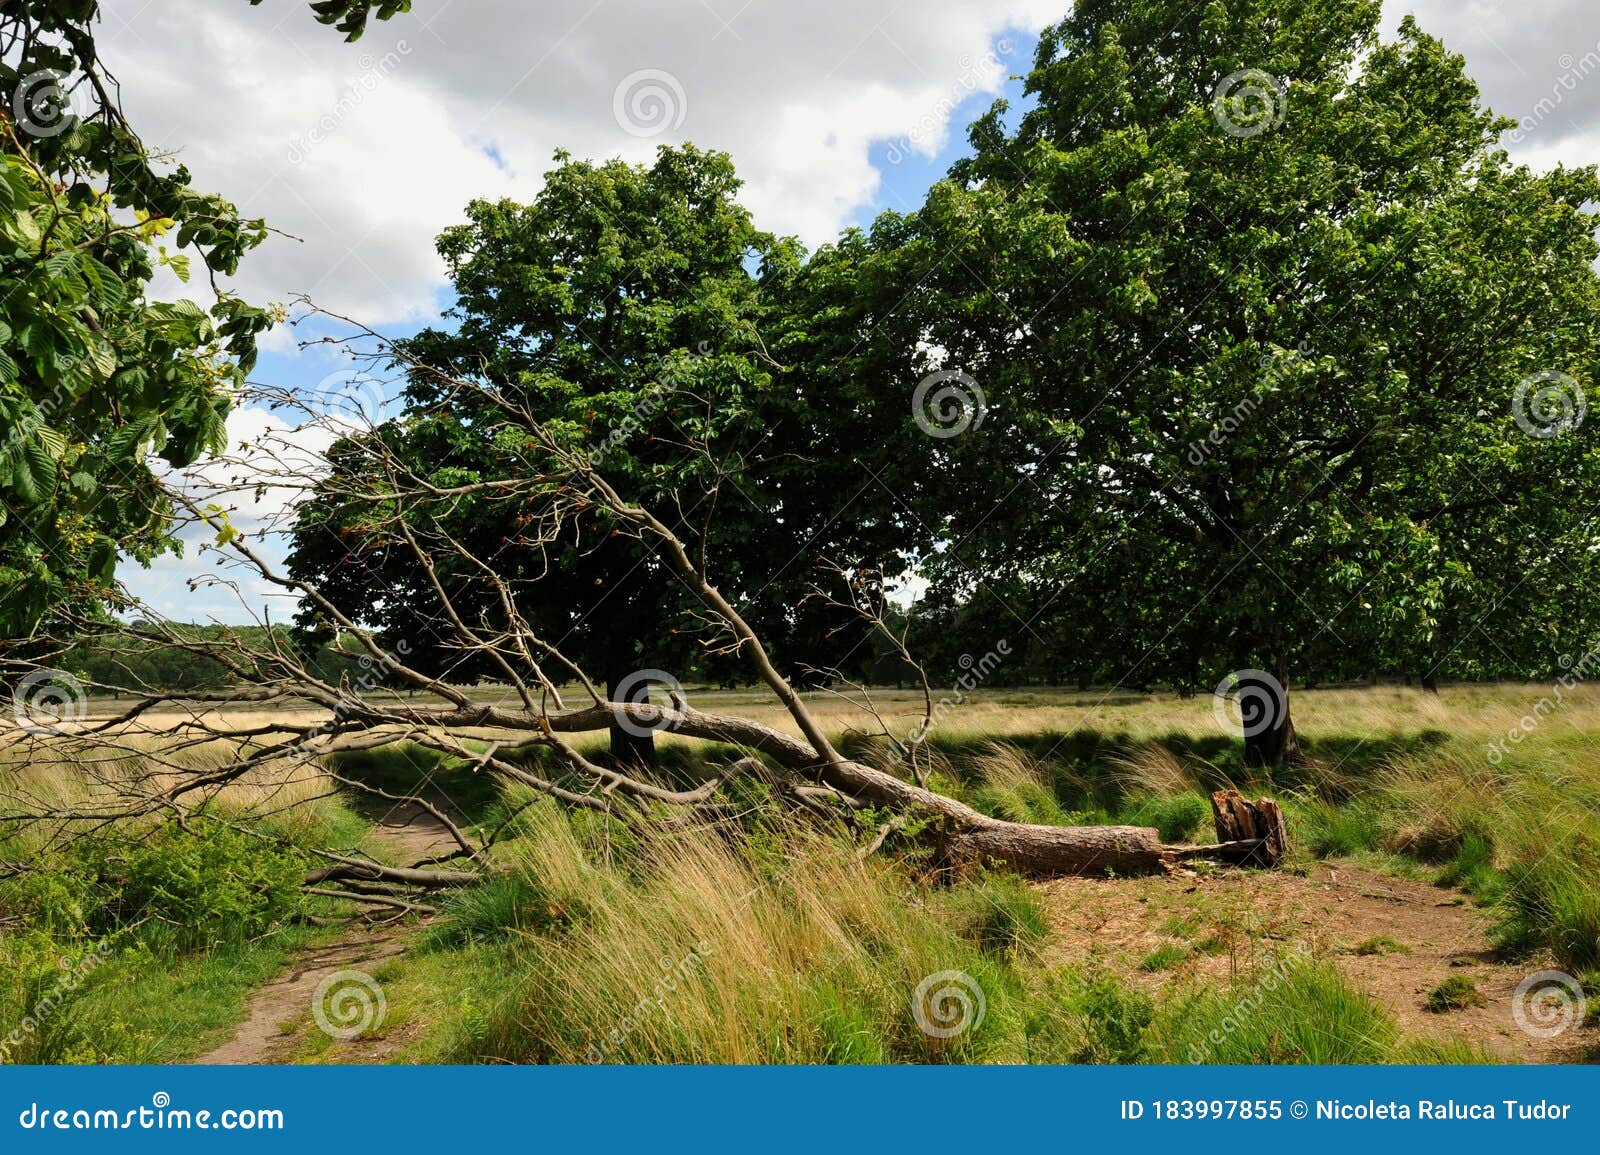 Broken Nature Conceptual Image with Dead Tree and Young Trees Near it in Park London Stock Image - Image of home, english: 183997855